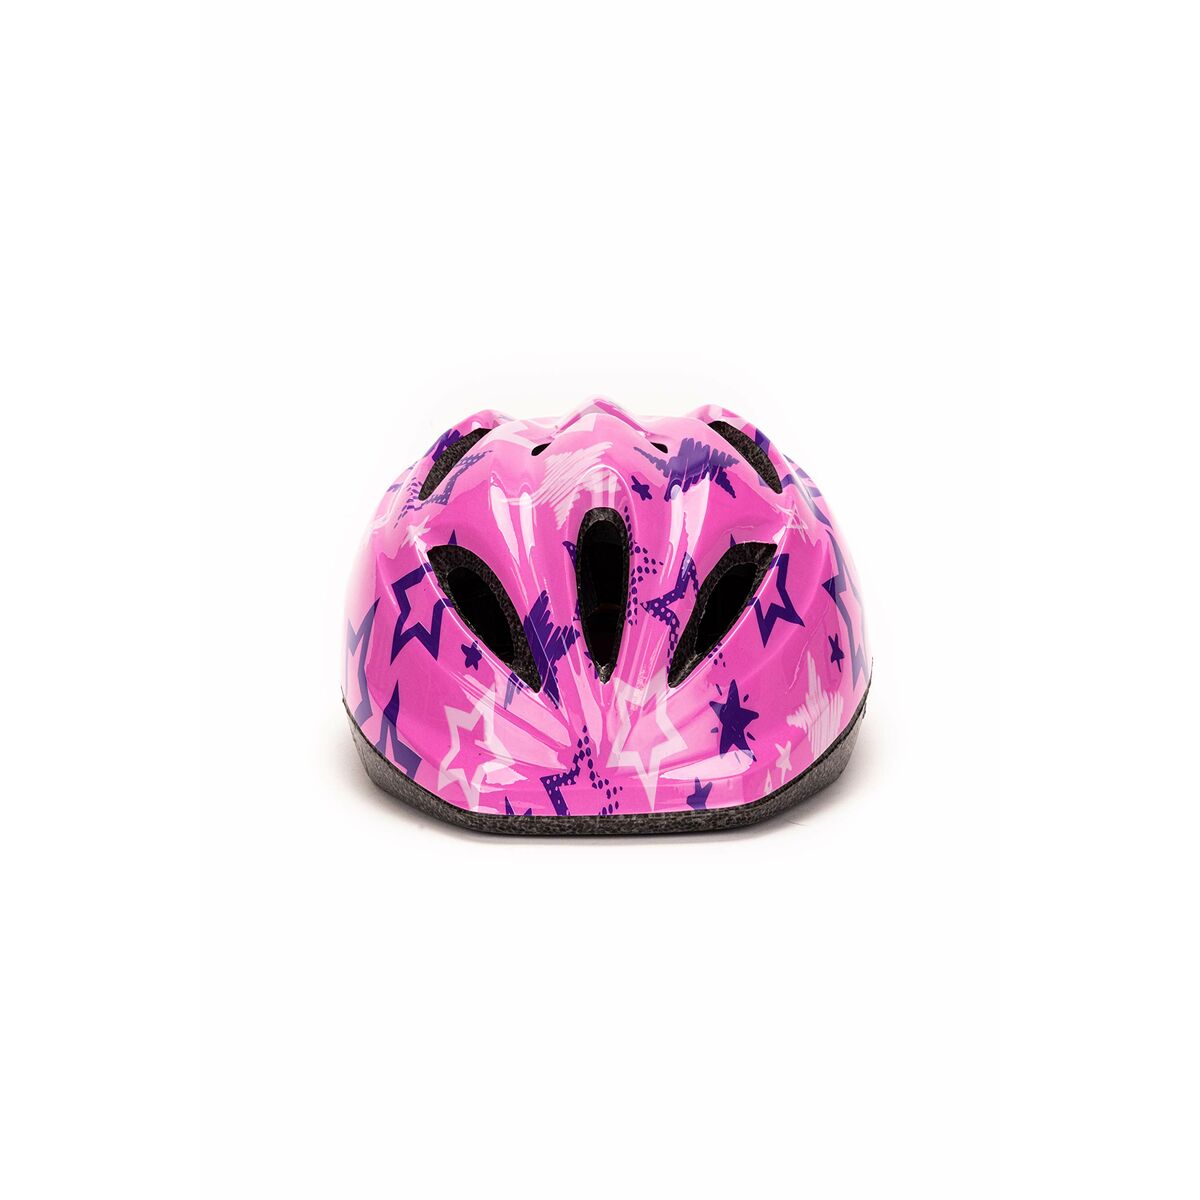 Children's Cycling Helmet Urban Prime UP-HLM-KID/P Pink One size